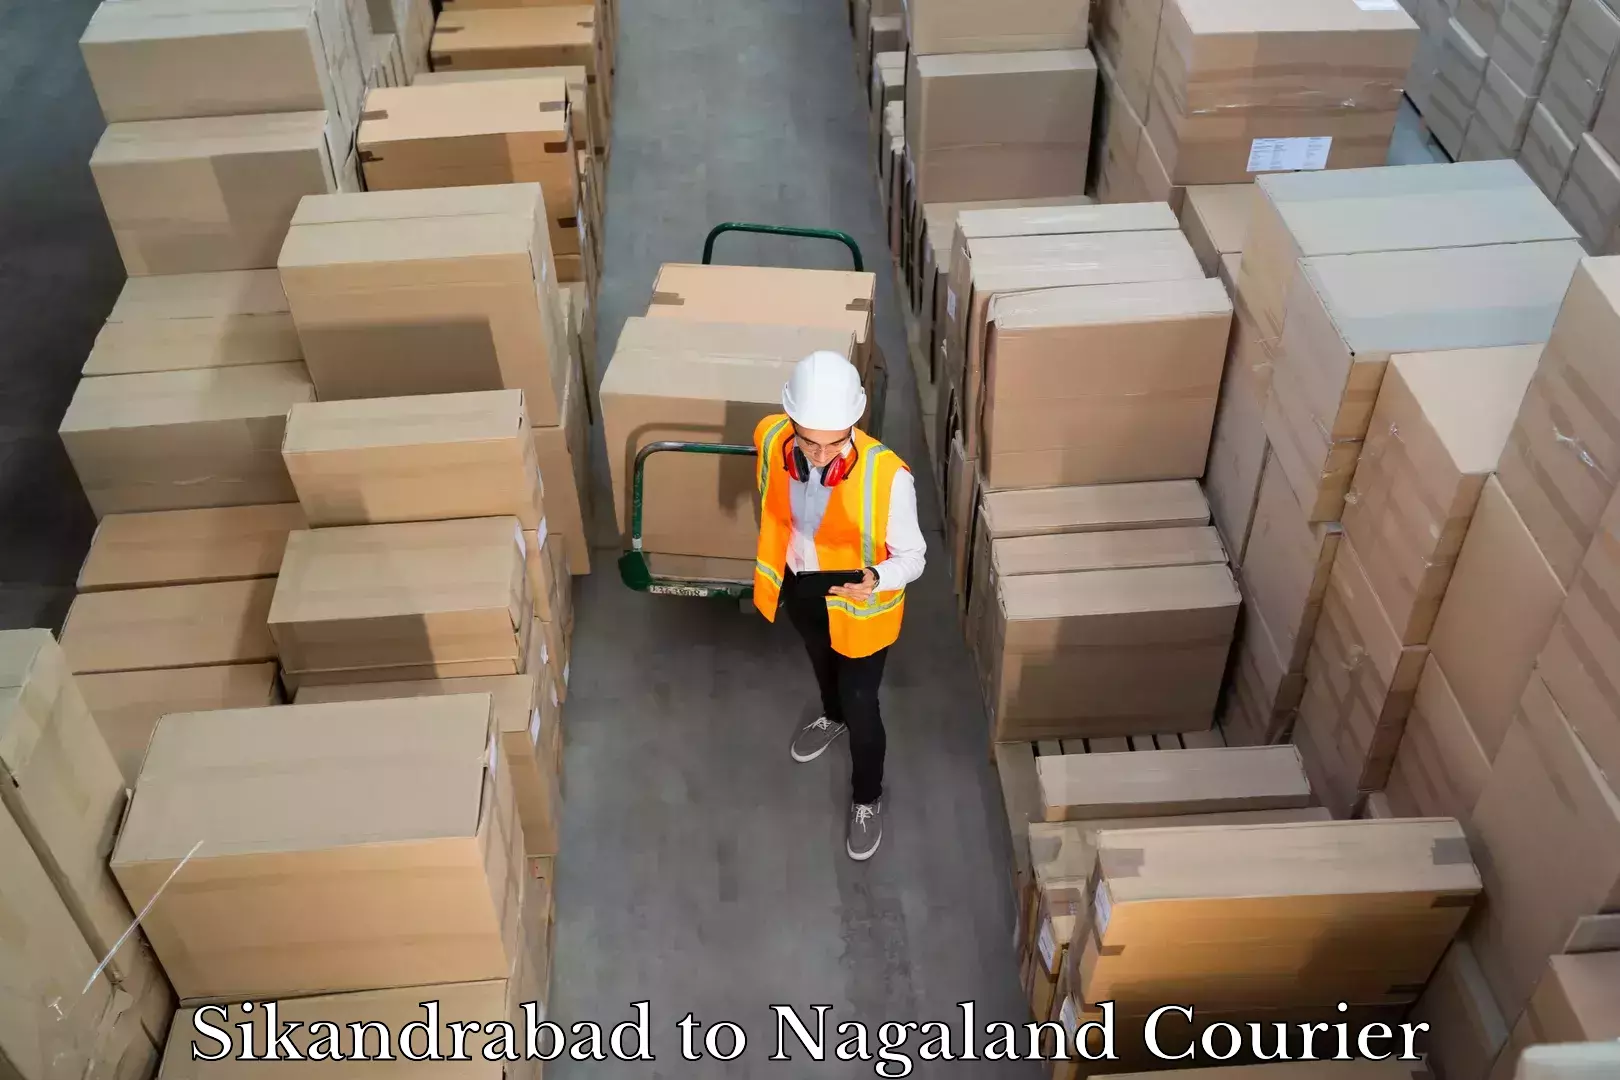 Luggage shipment specialists in Sikandrabad to Nagaland